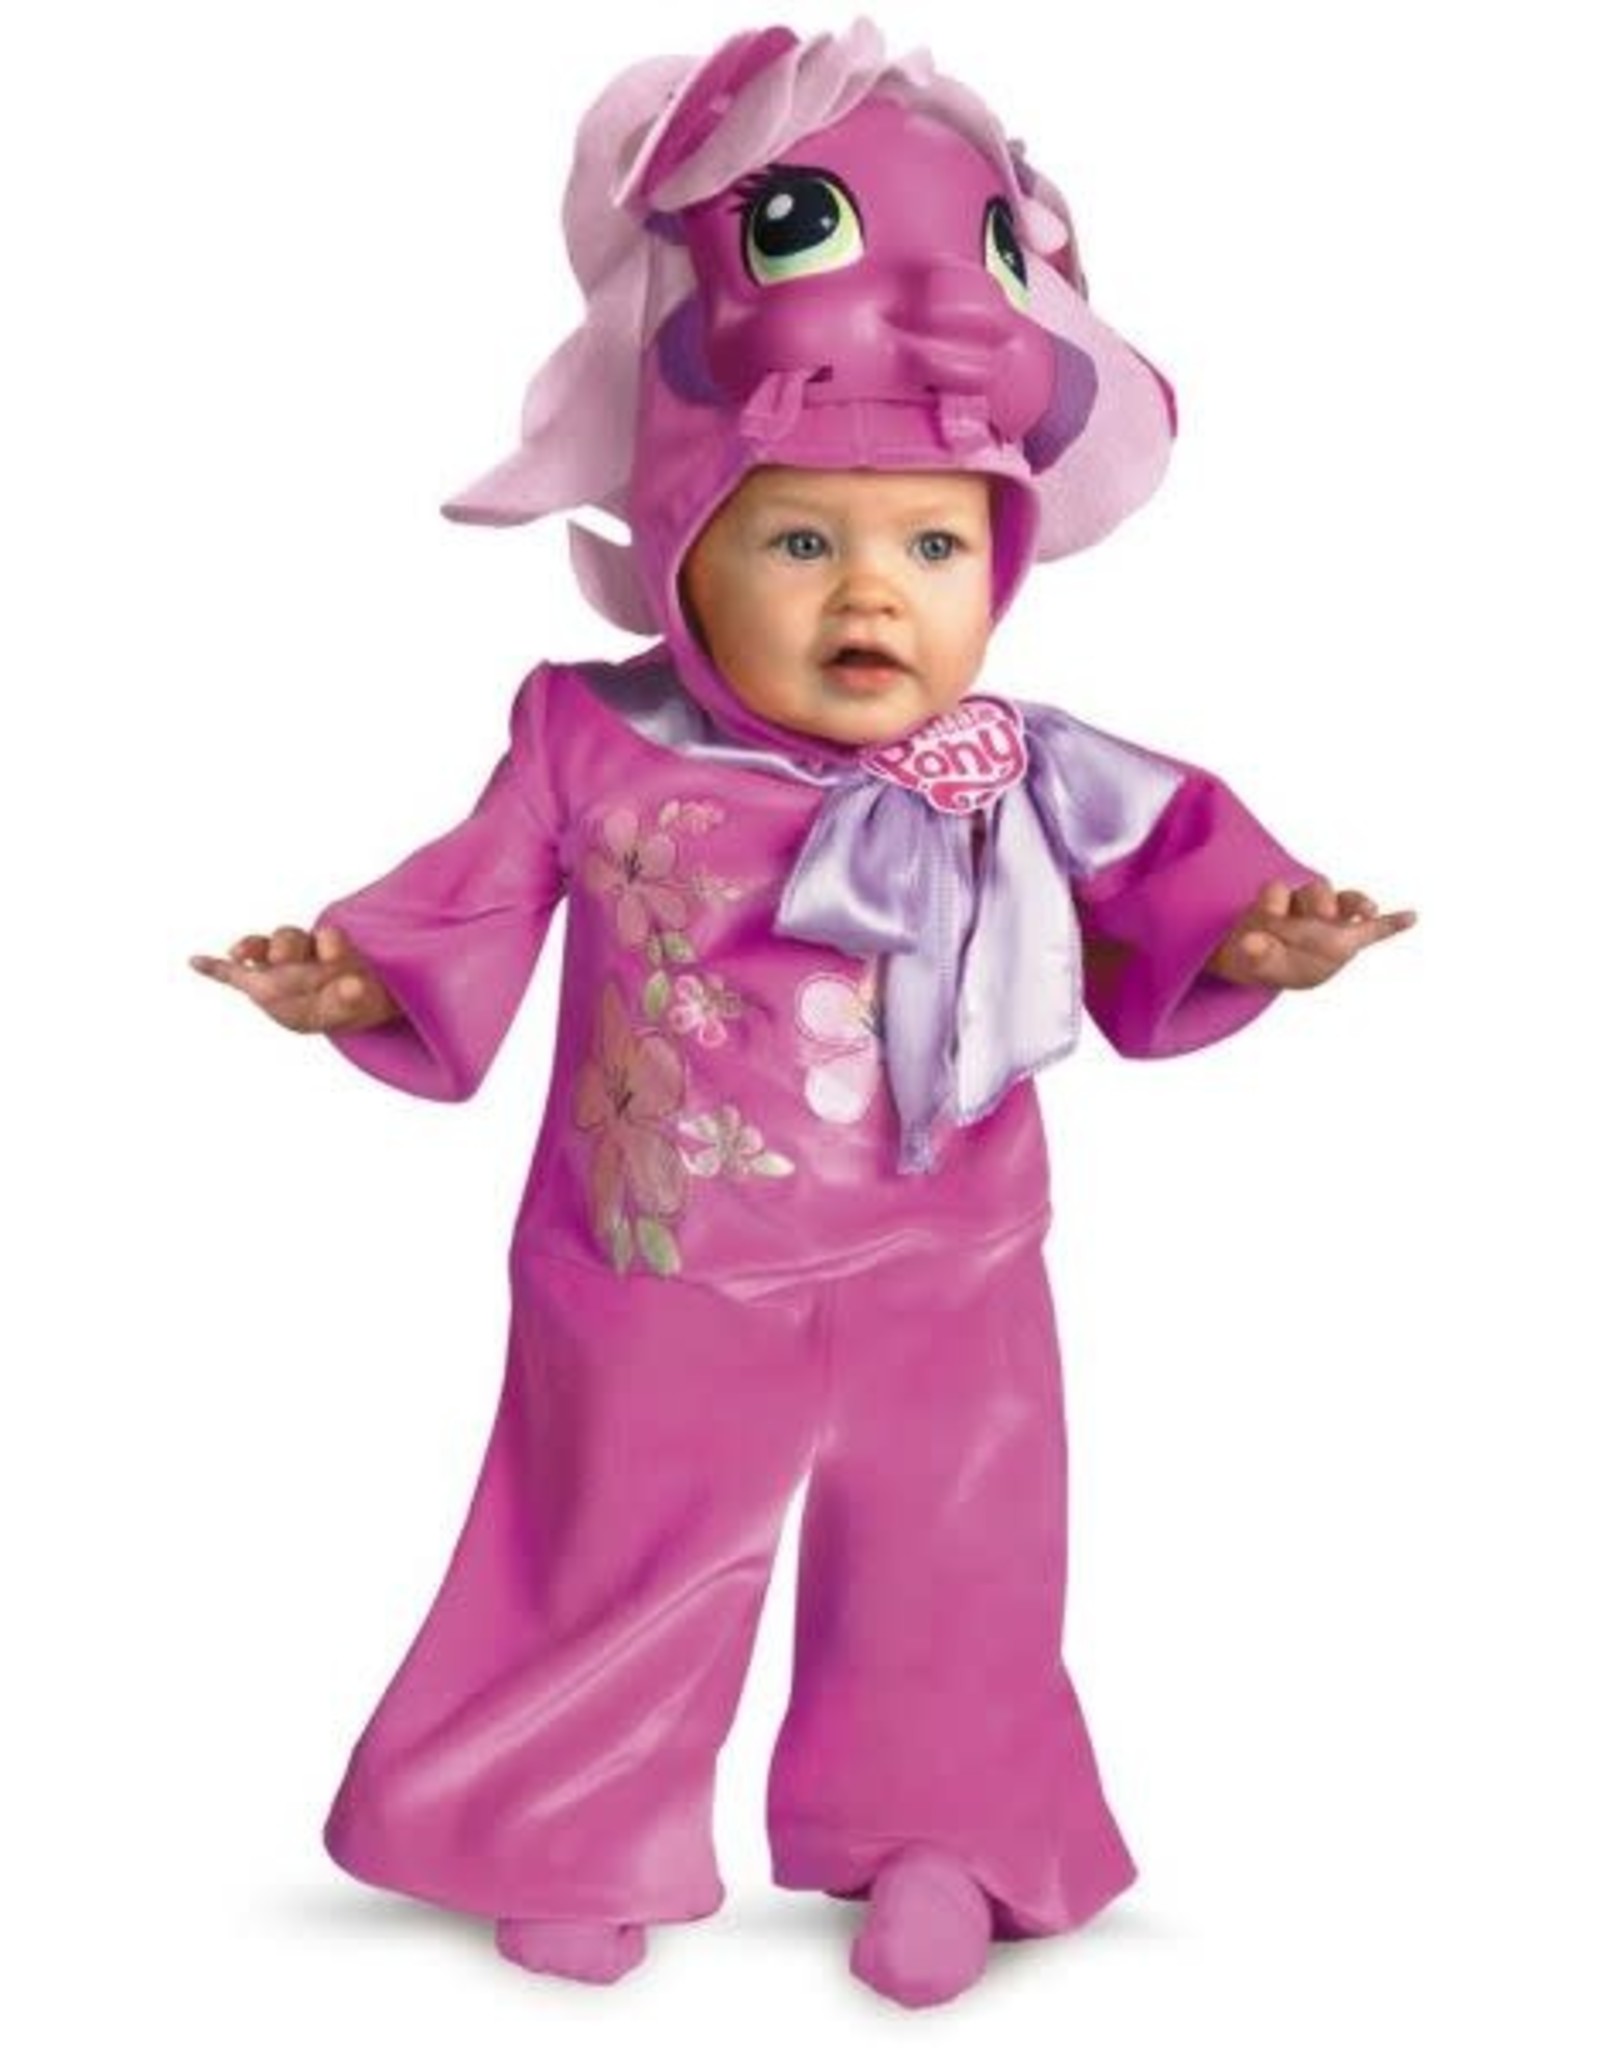 Disguise Inc My Little Pony Cheerilee, Pink, 12-18 Months (Toddler)